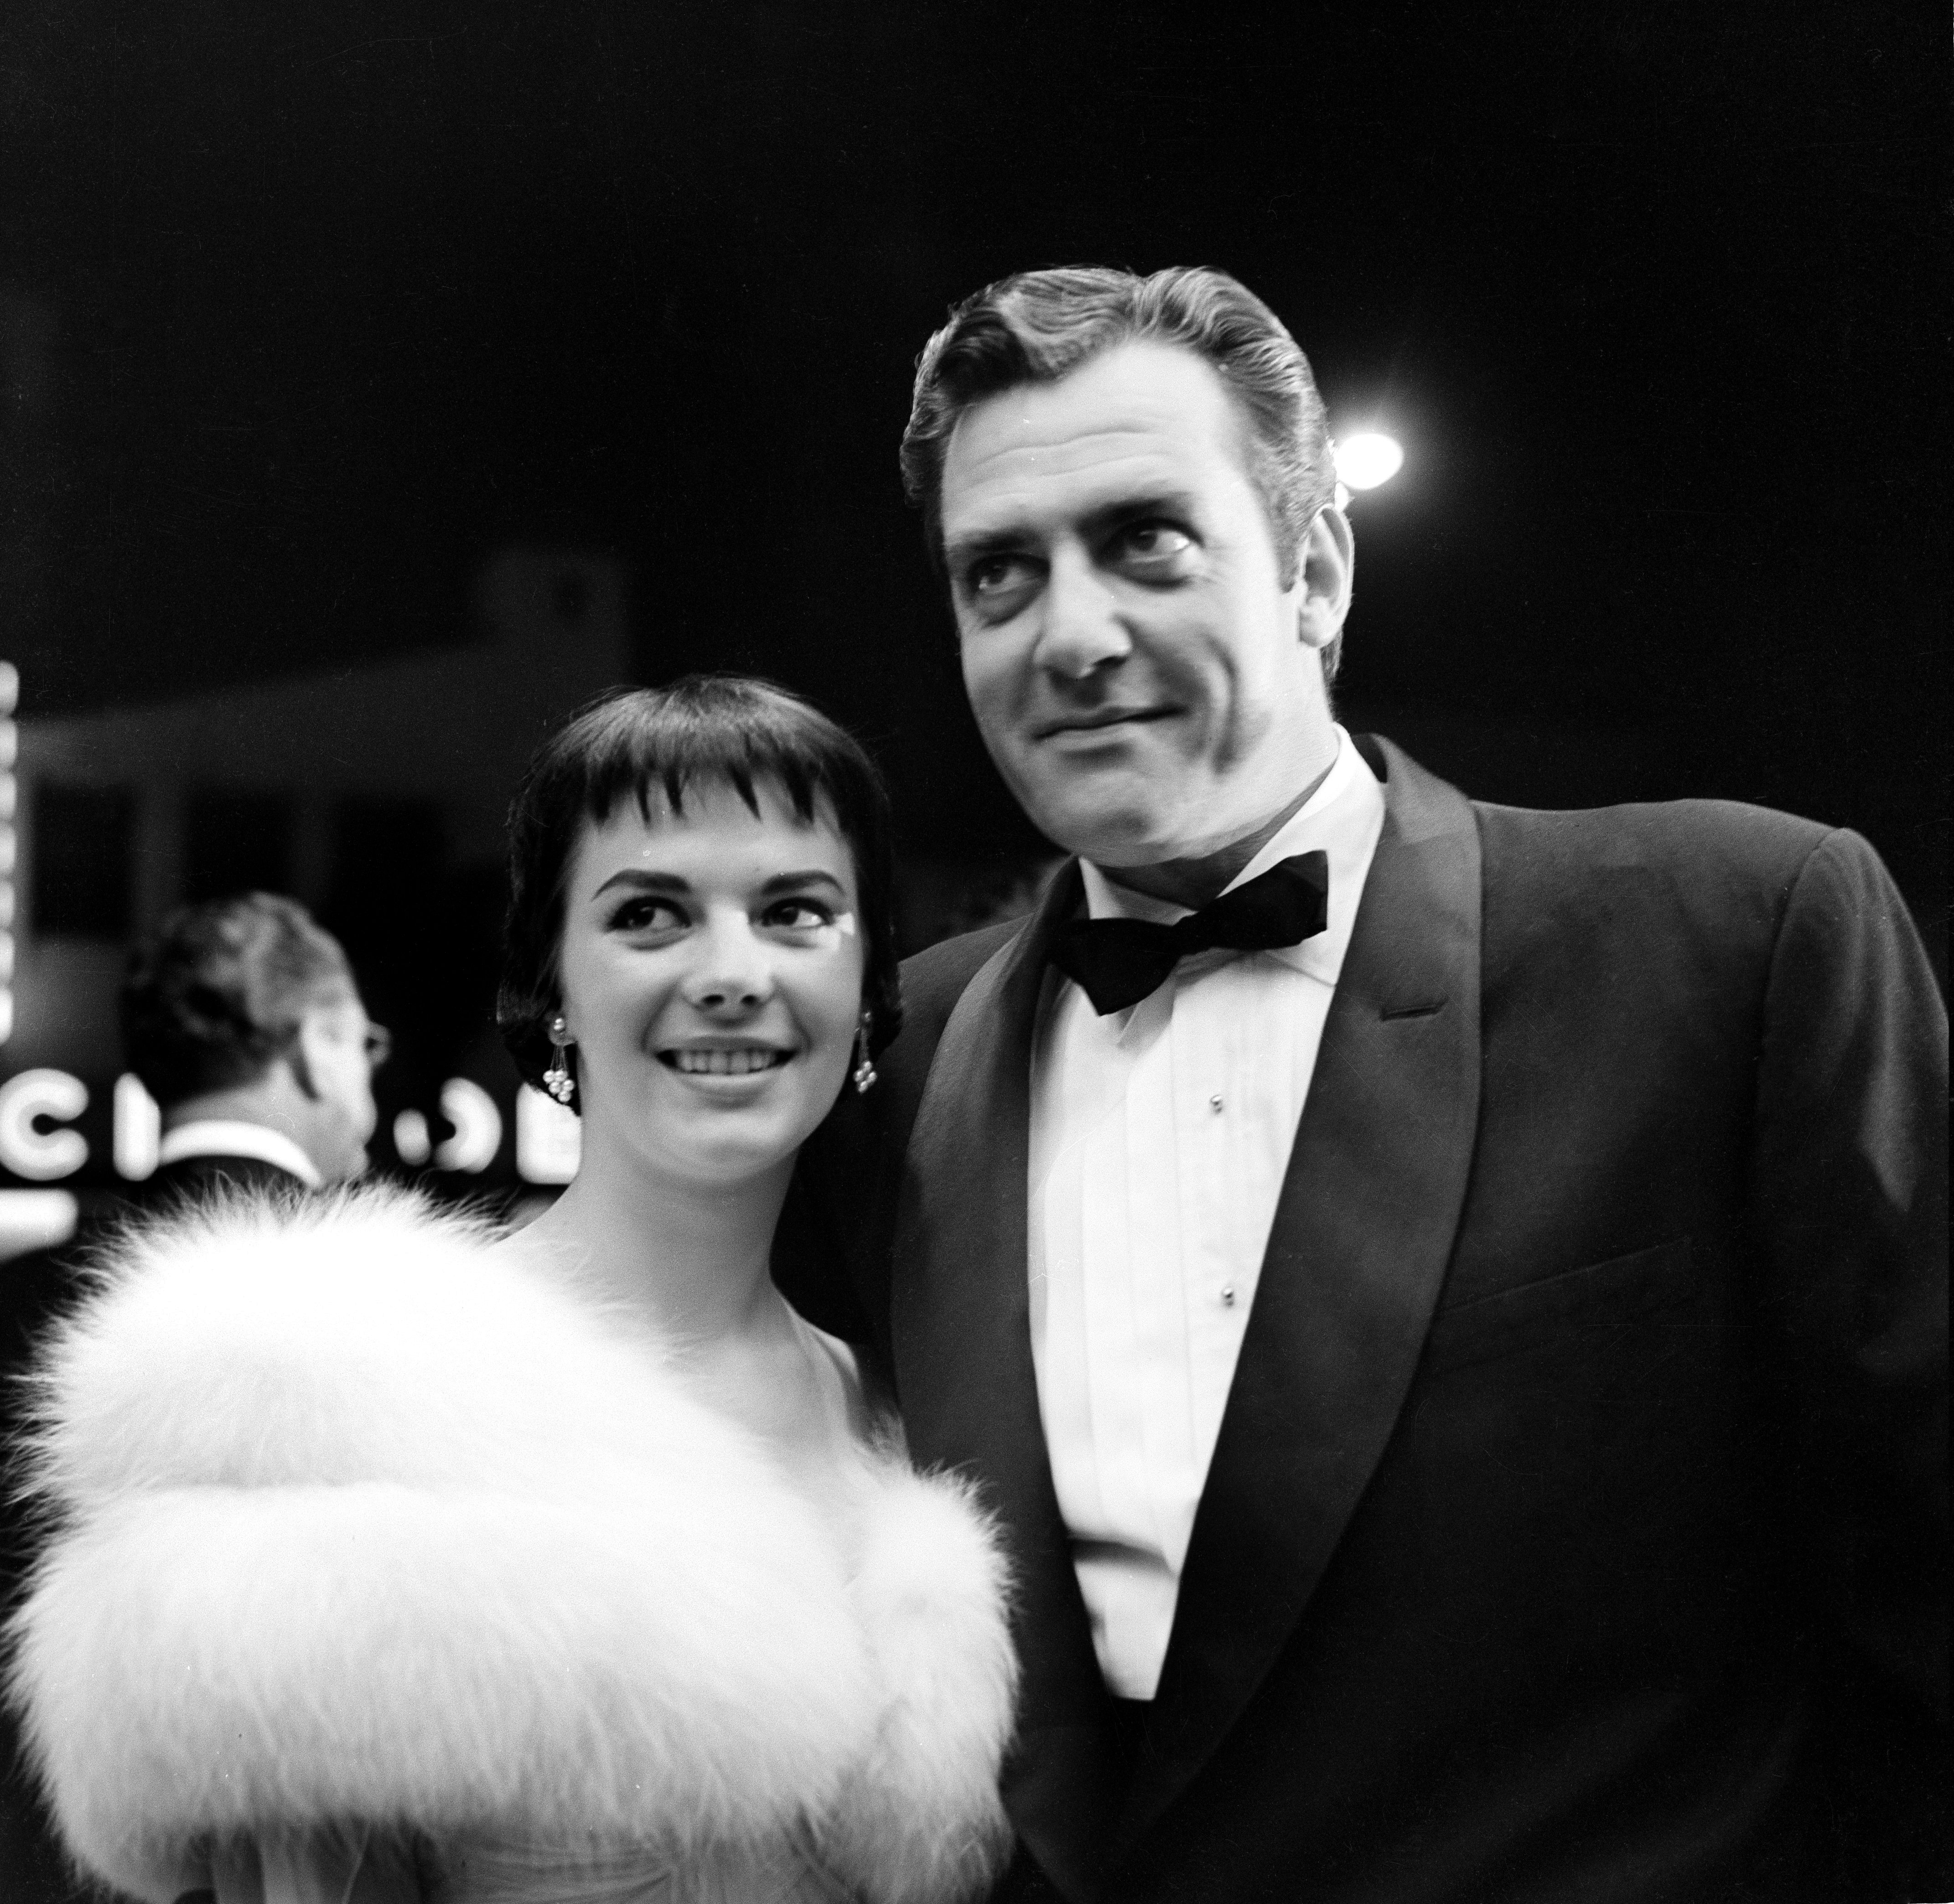 Actress Natalie Wood with Raymond Burr attending the premiere of "A Cry in the Night" in Los Angeles, California. / Source: Getty Images